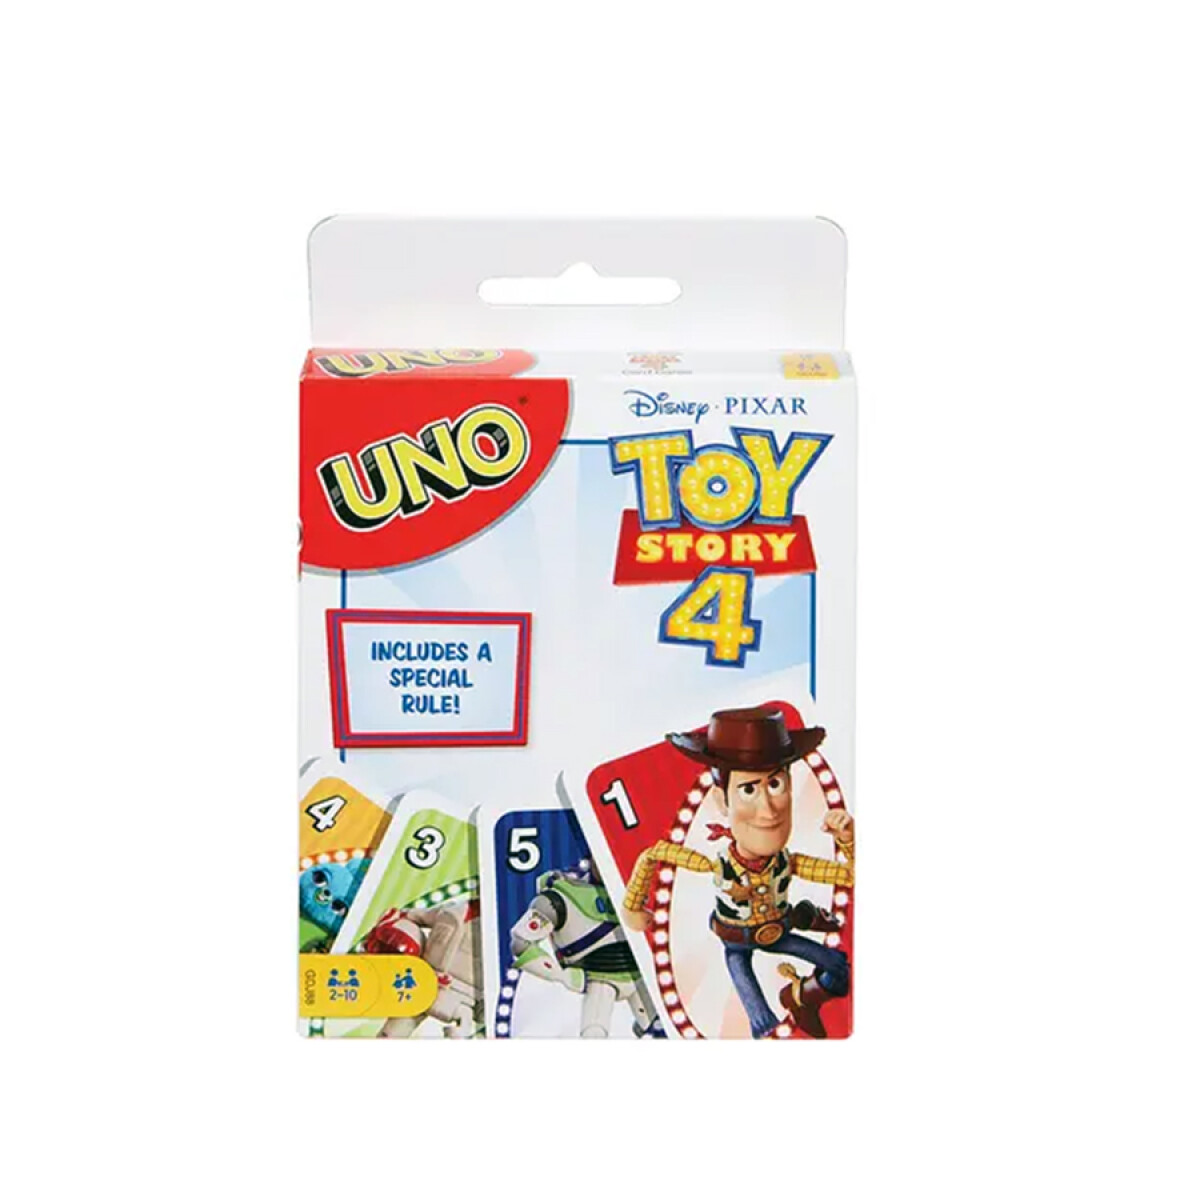 UNO [Toy Story 4] 